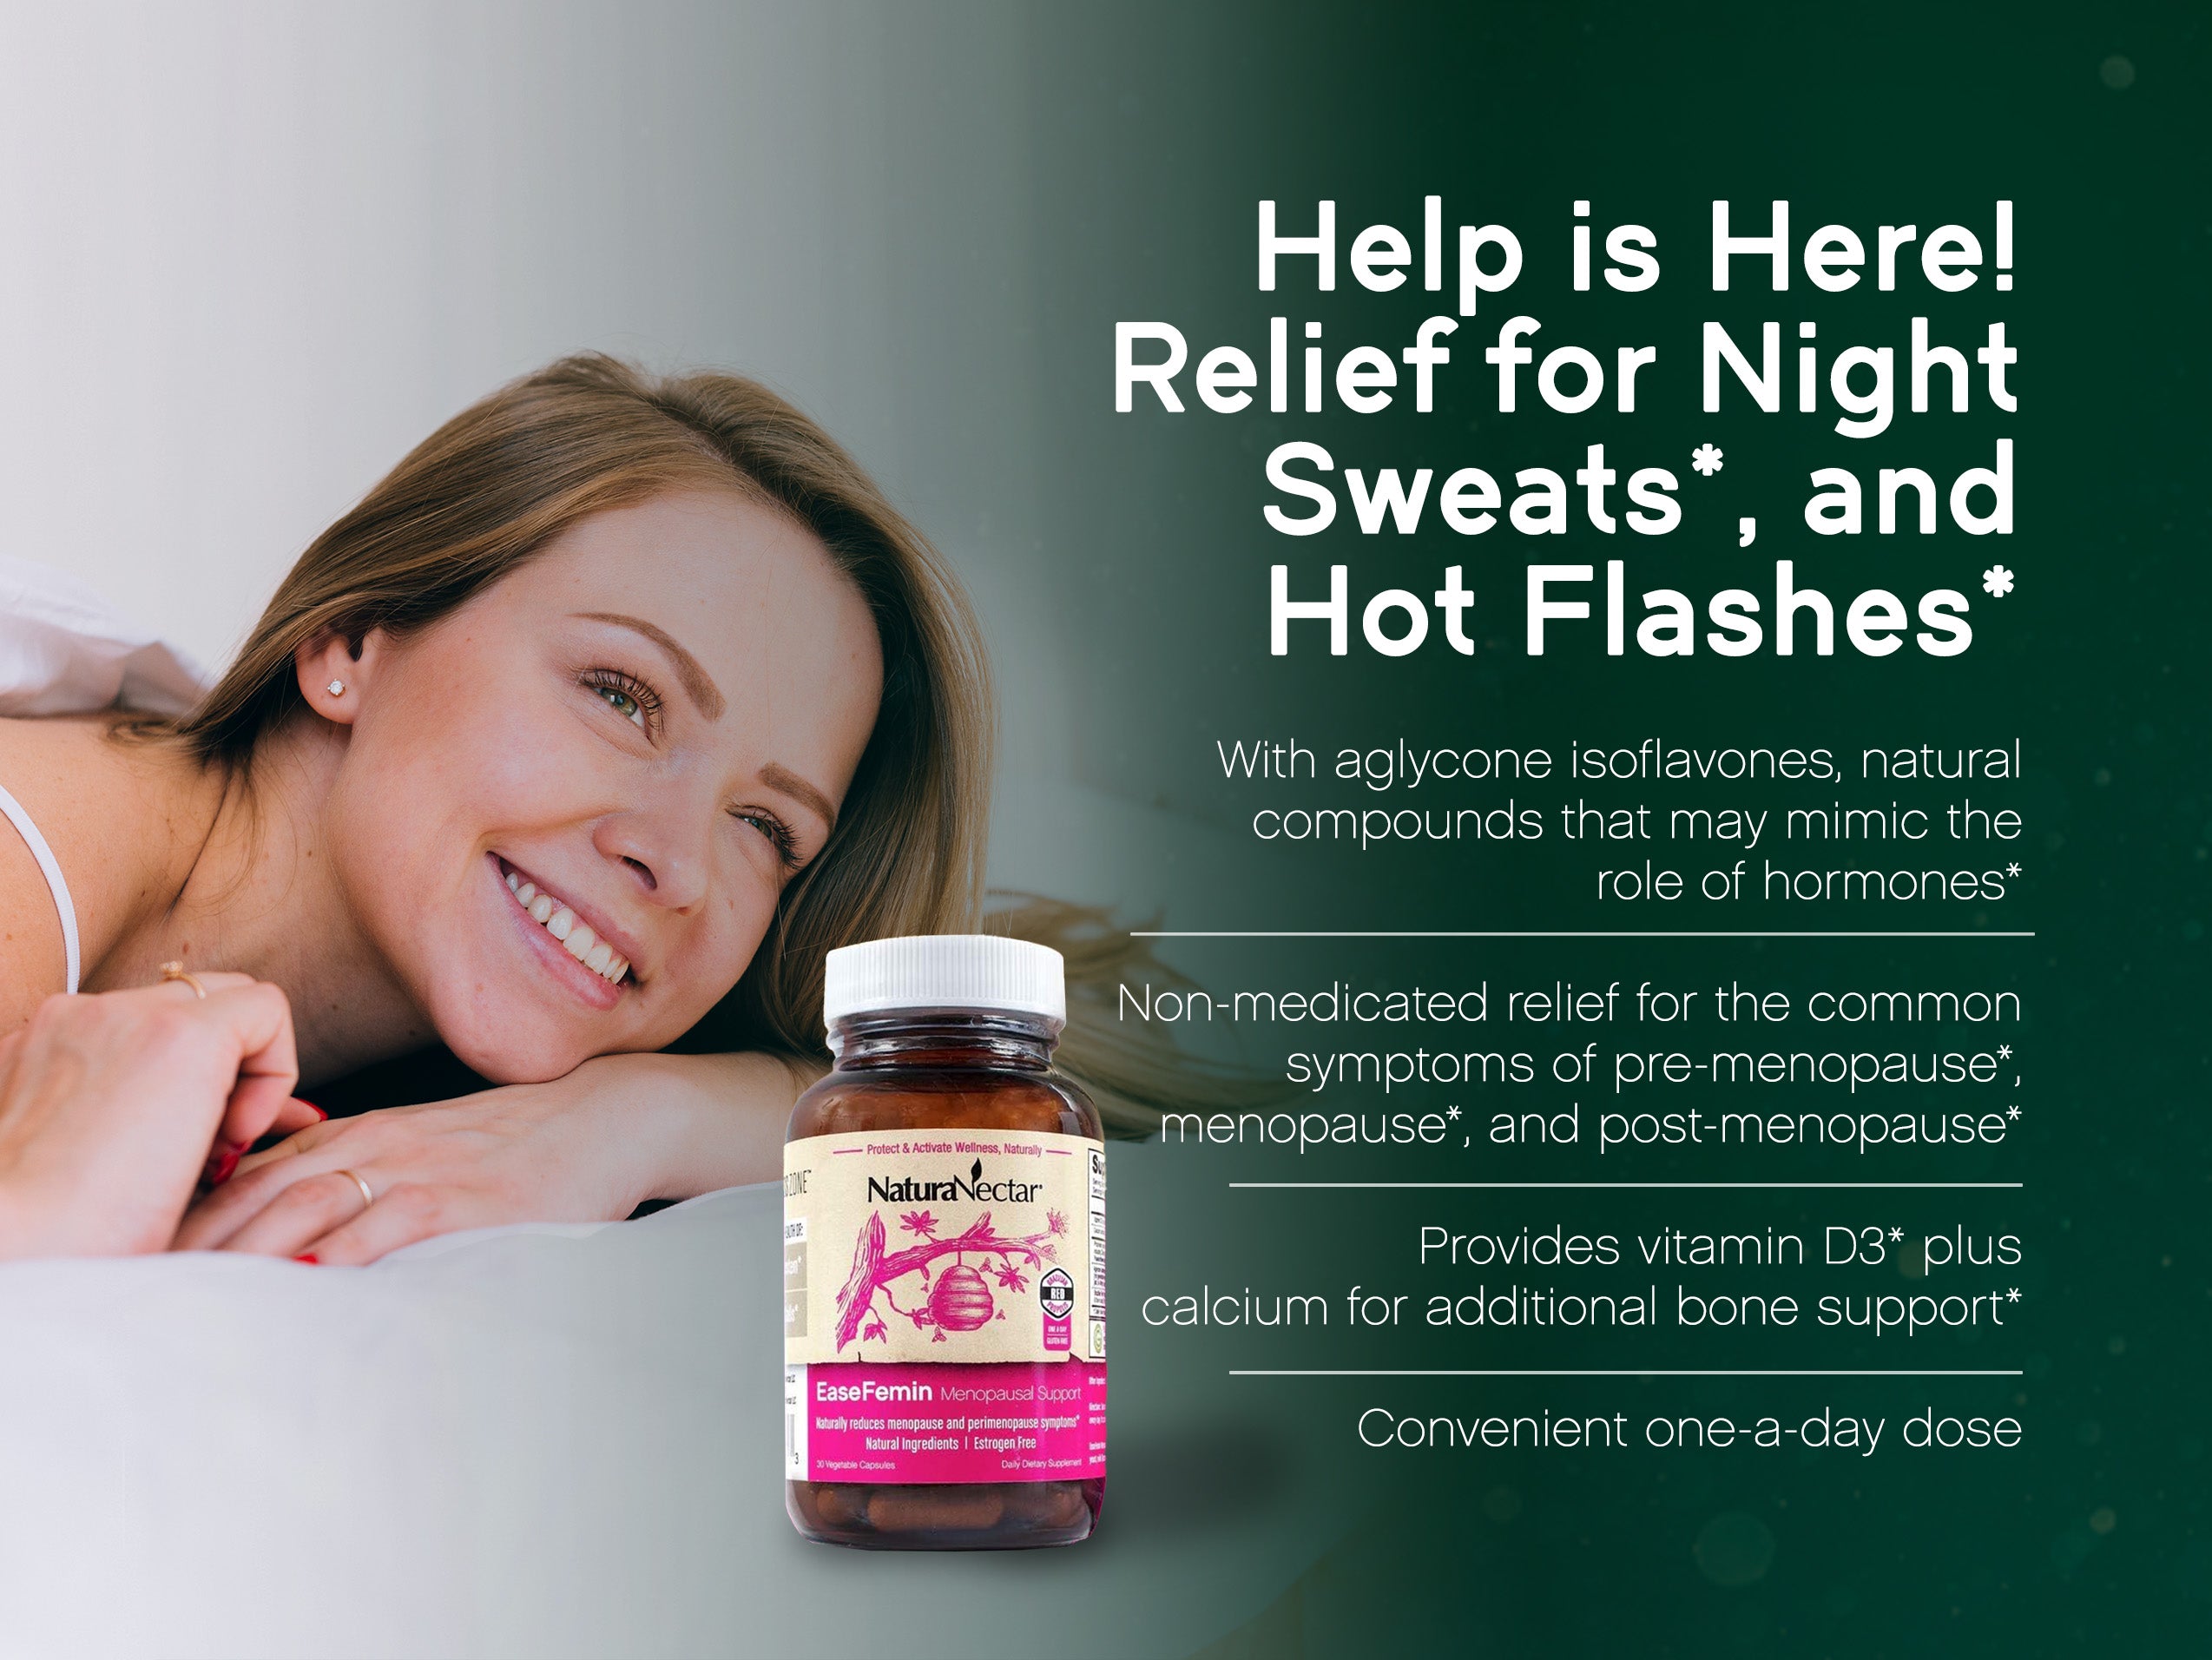 HELP IS HERE! RELIEF FOR NIGHT SWEATS &amp; HOT FLASHES*